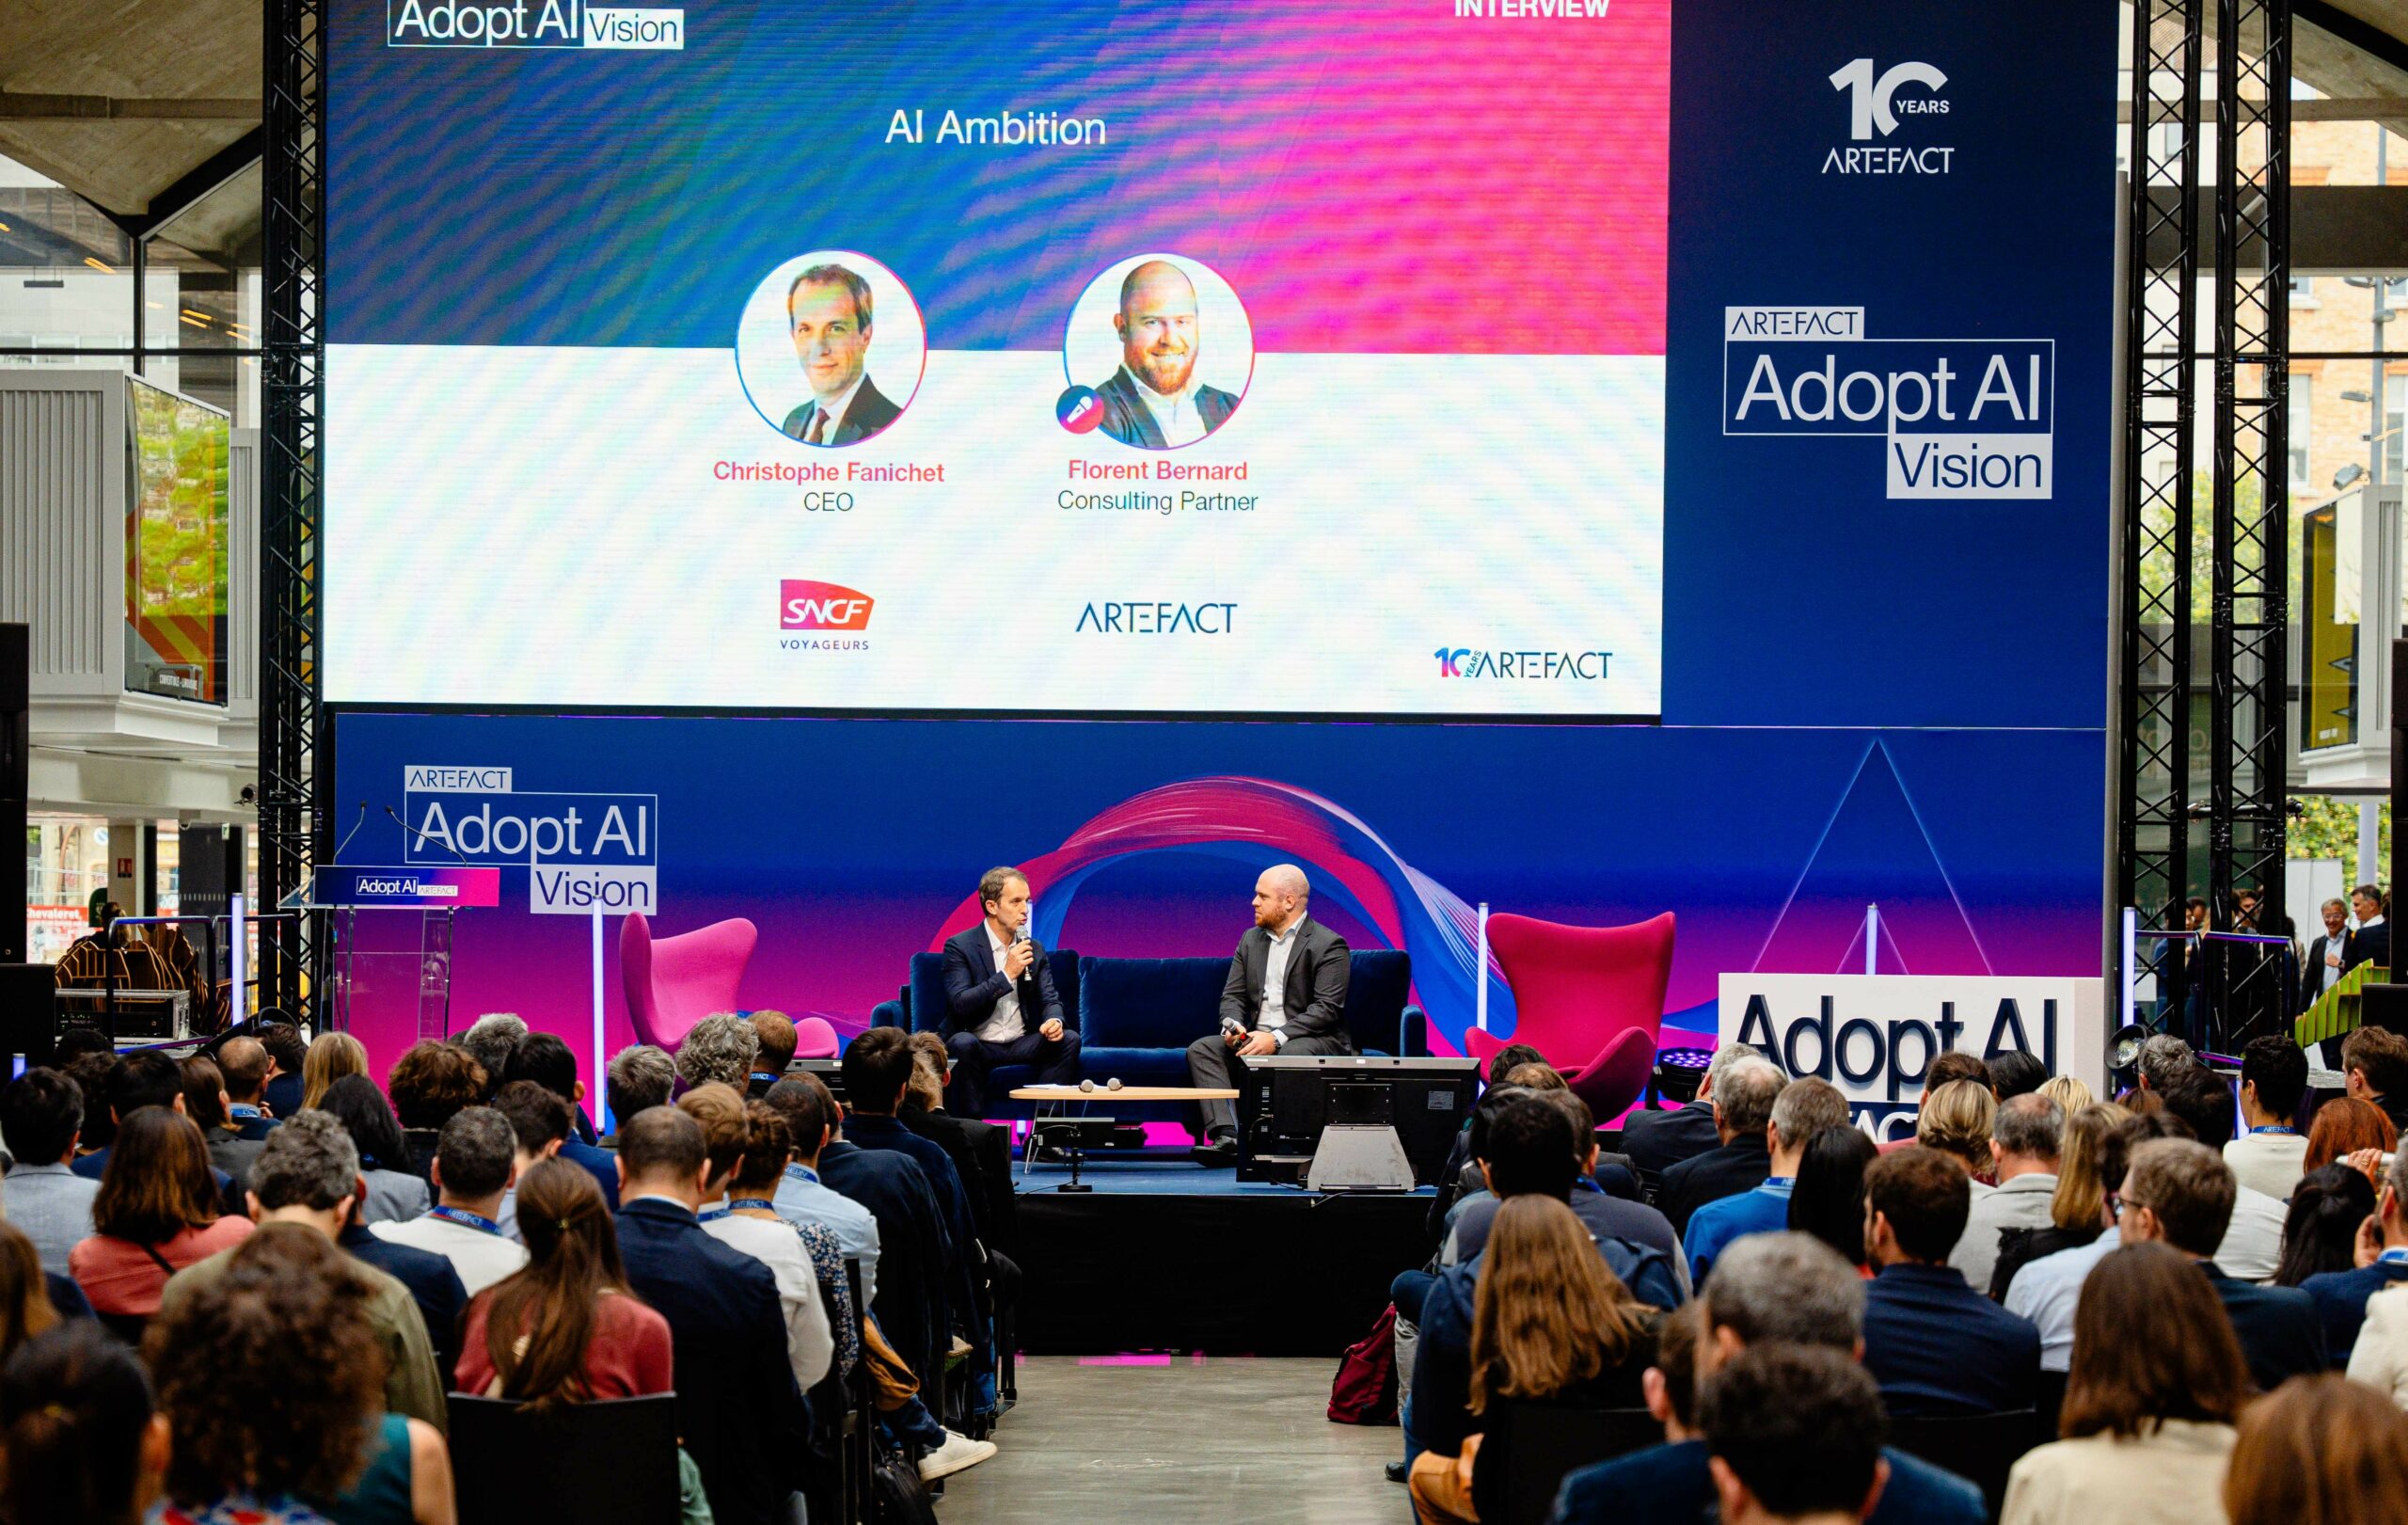 Christophe Fanichet, CEO of SNCF VOYAGEURS at the Adopt AI Summit – AI Ambition